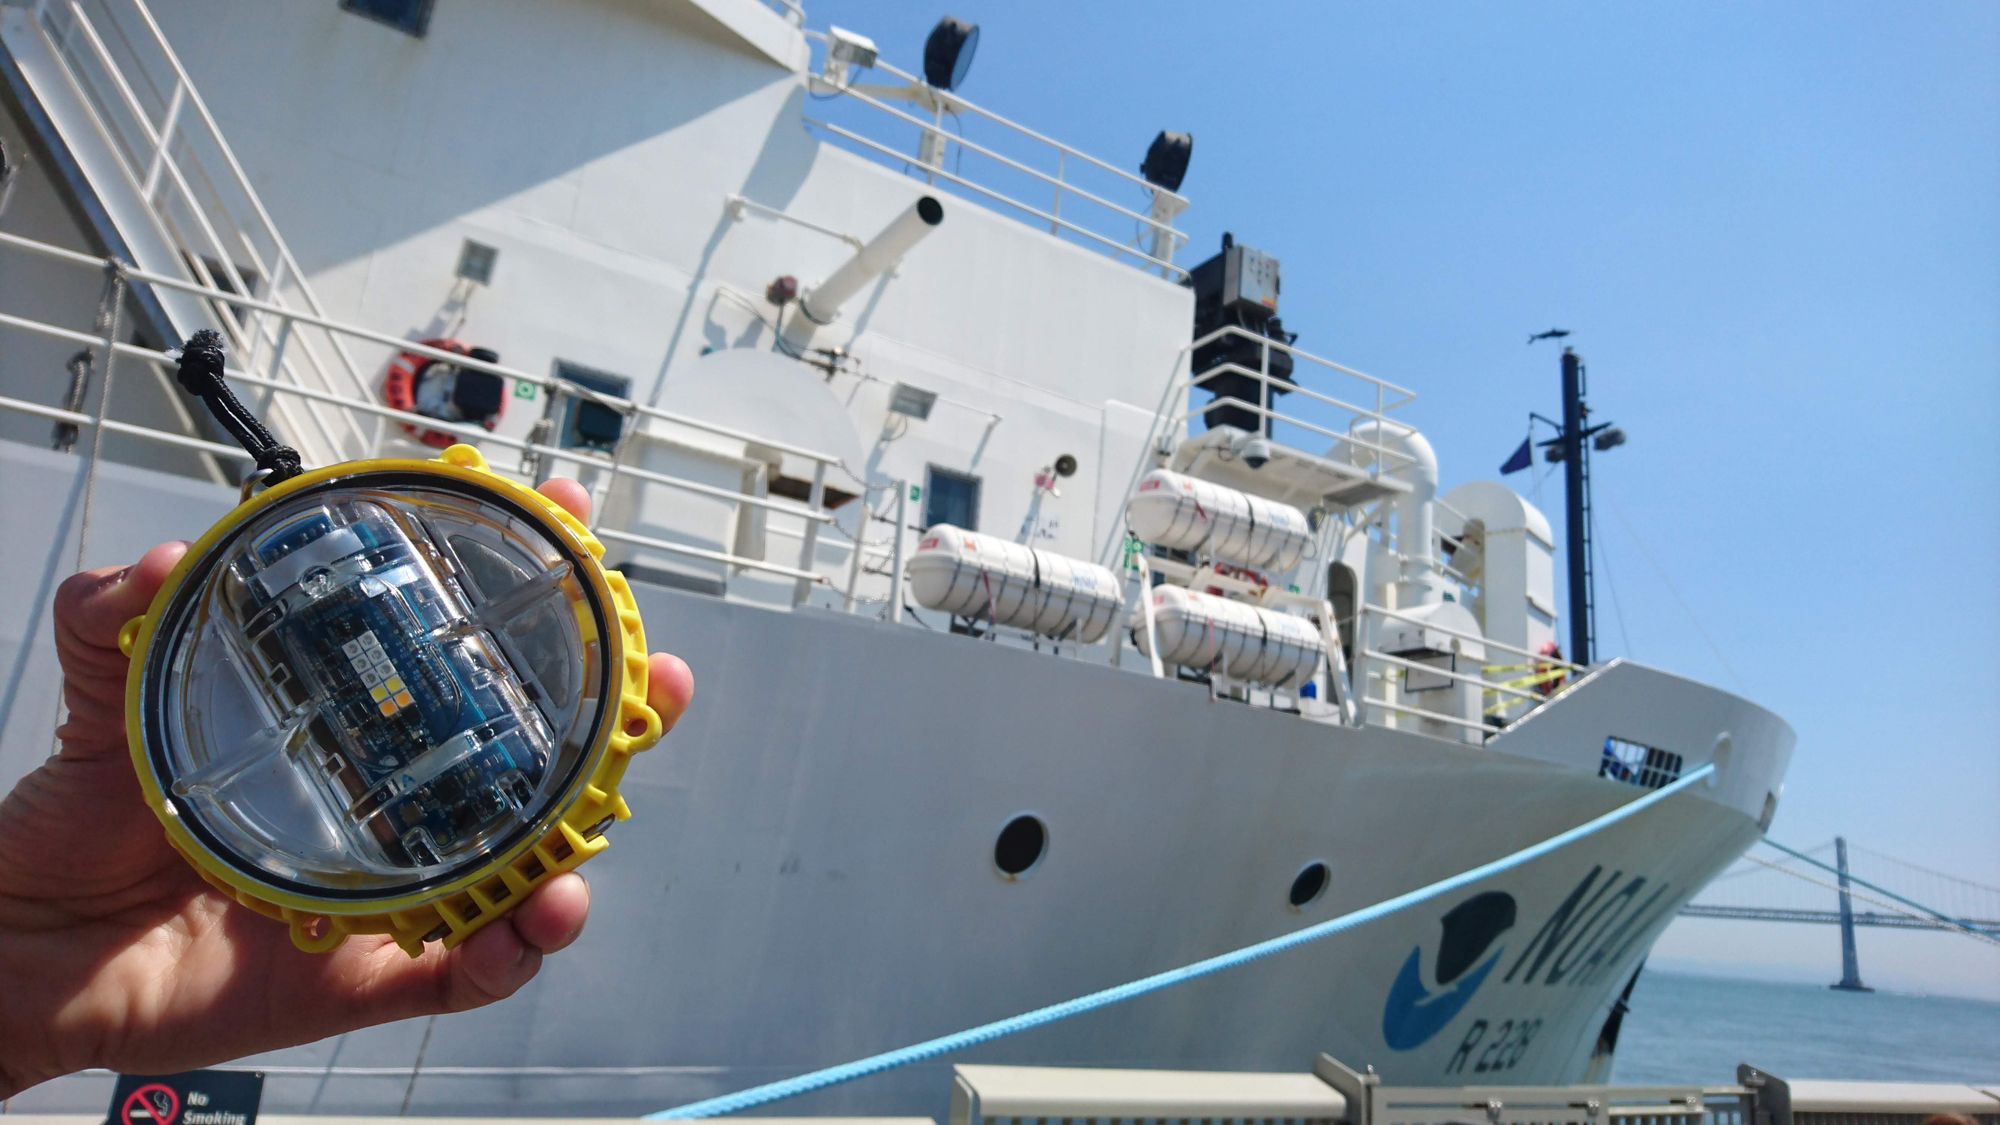 A photo of a hand holding the Pisces light, a round disc encased in yellow plastic, with a ship and sea in the background